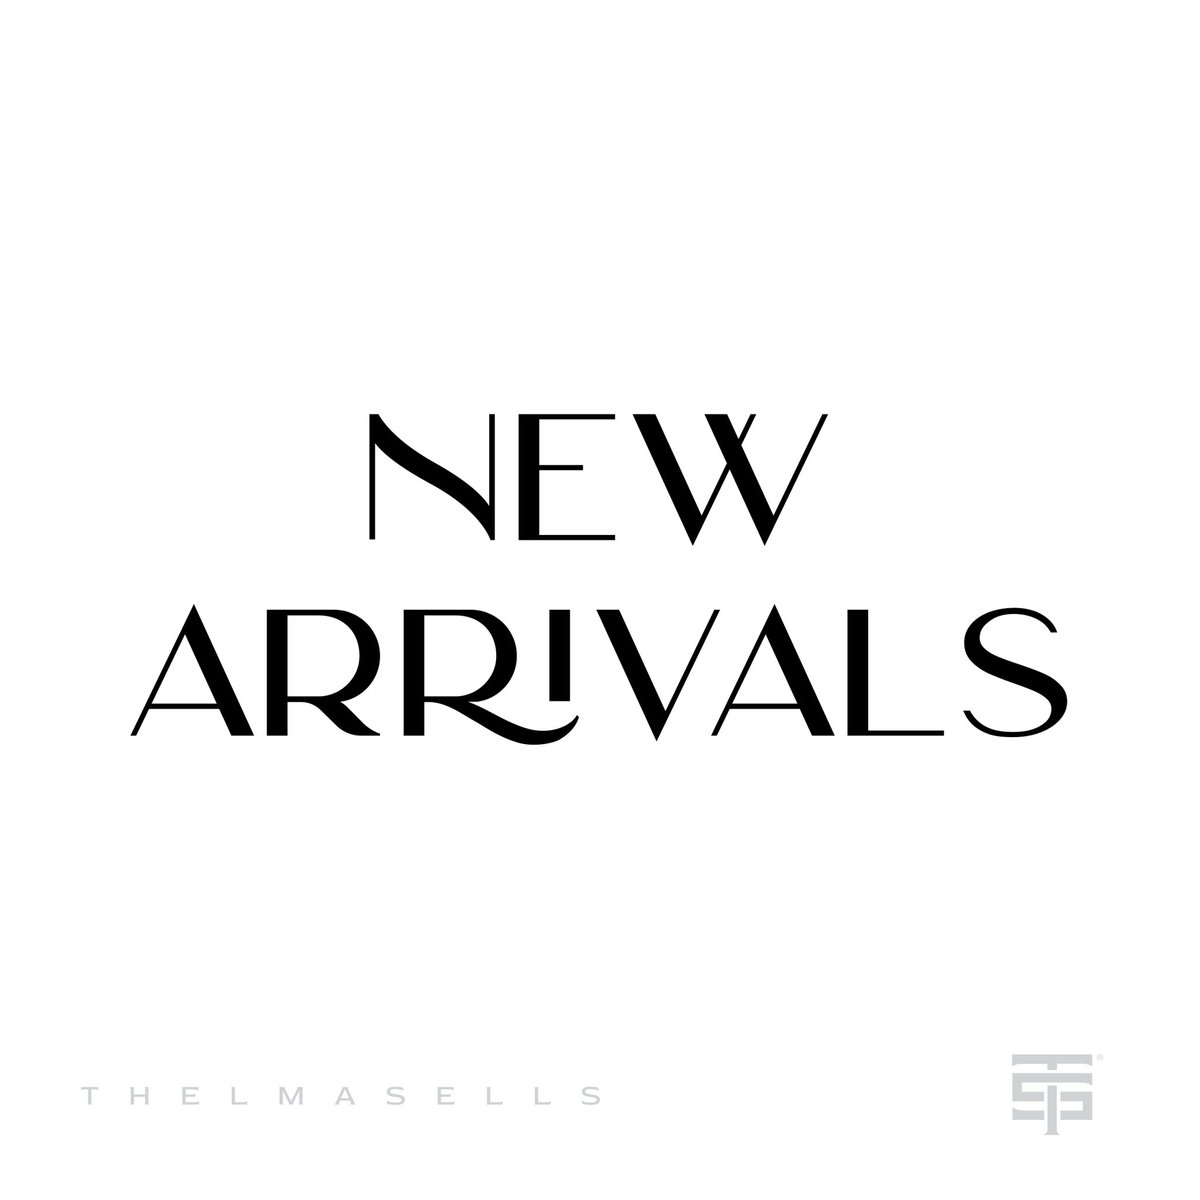 New arrivals to be posted tomorrow by 3pm. Turn on our post notification so you don’t miss a thing. 💃🏾💃🏾#jewlery #accessories #navelrings #industrialpiercing #rings #bohemianearrings